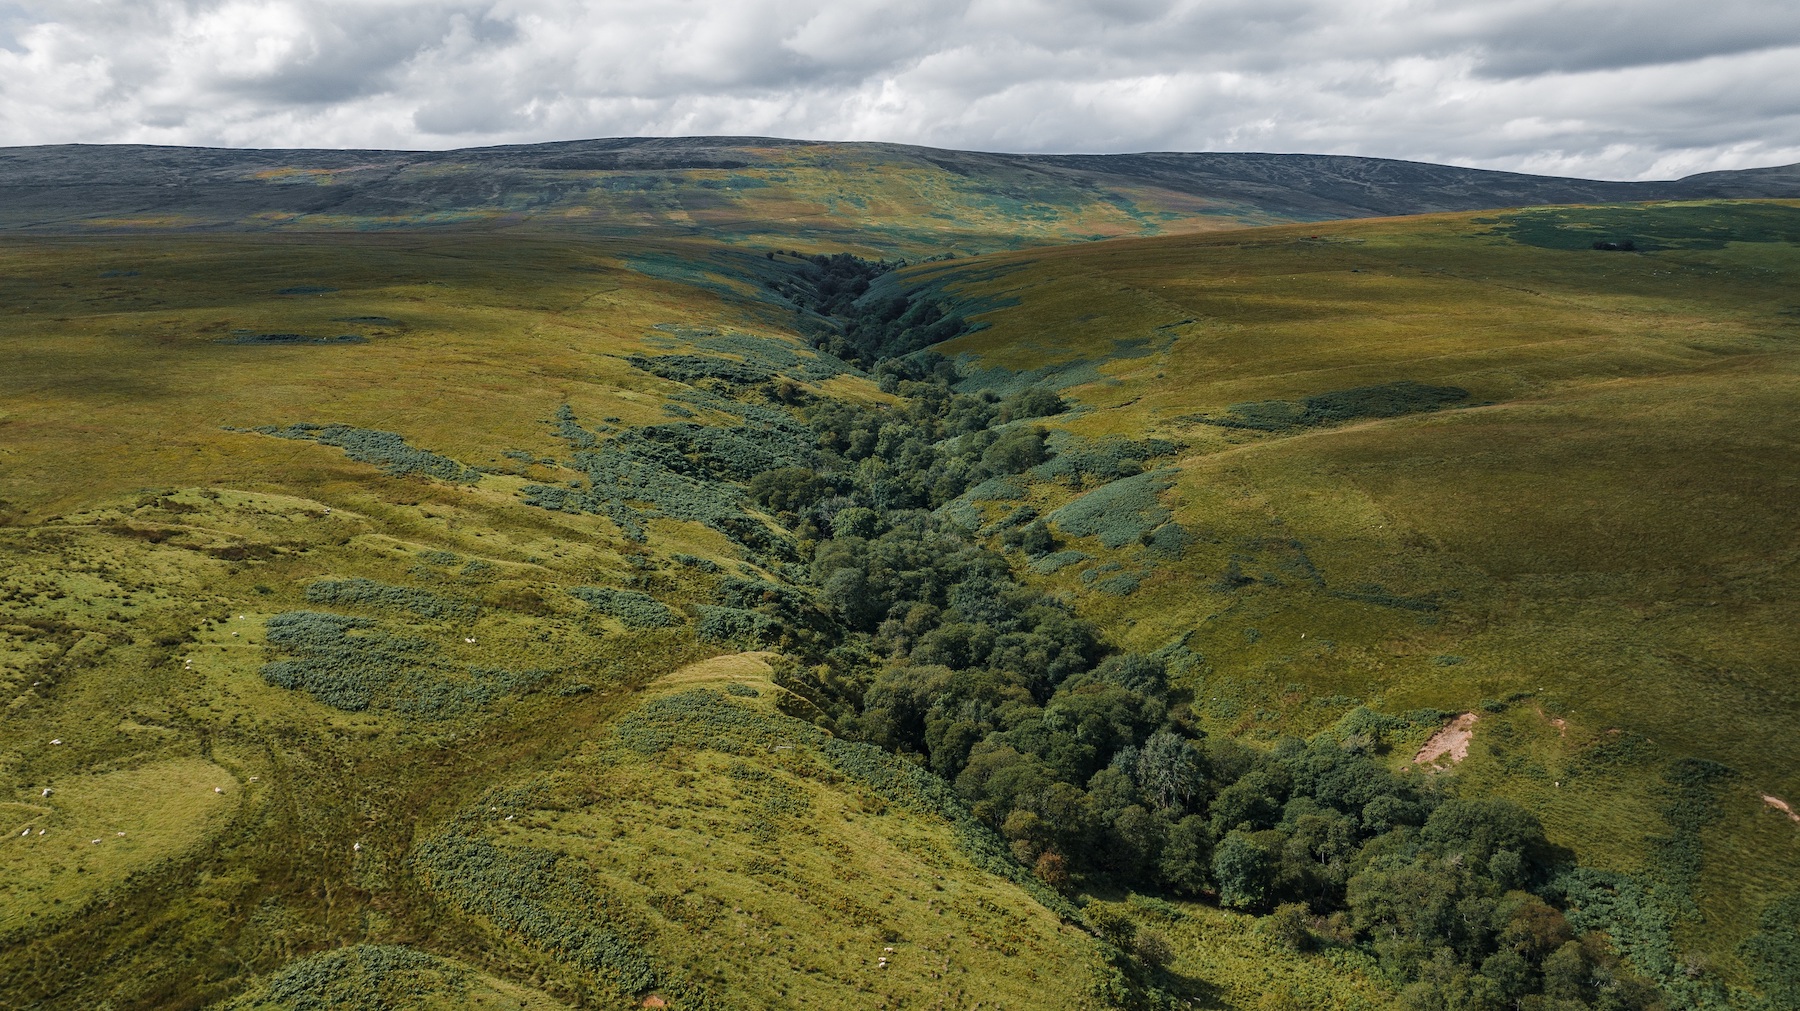 Oxygen Conservation expands conservation efforts with £20m loan and 23,000 acres in Scotland